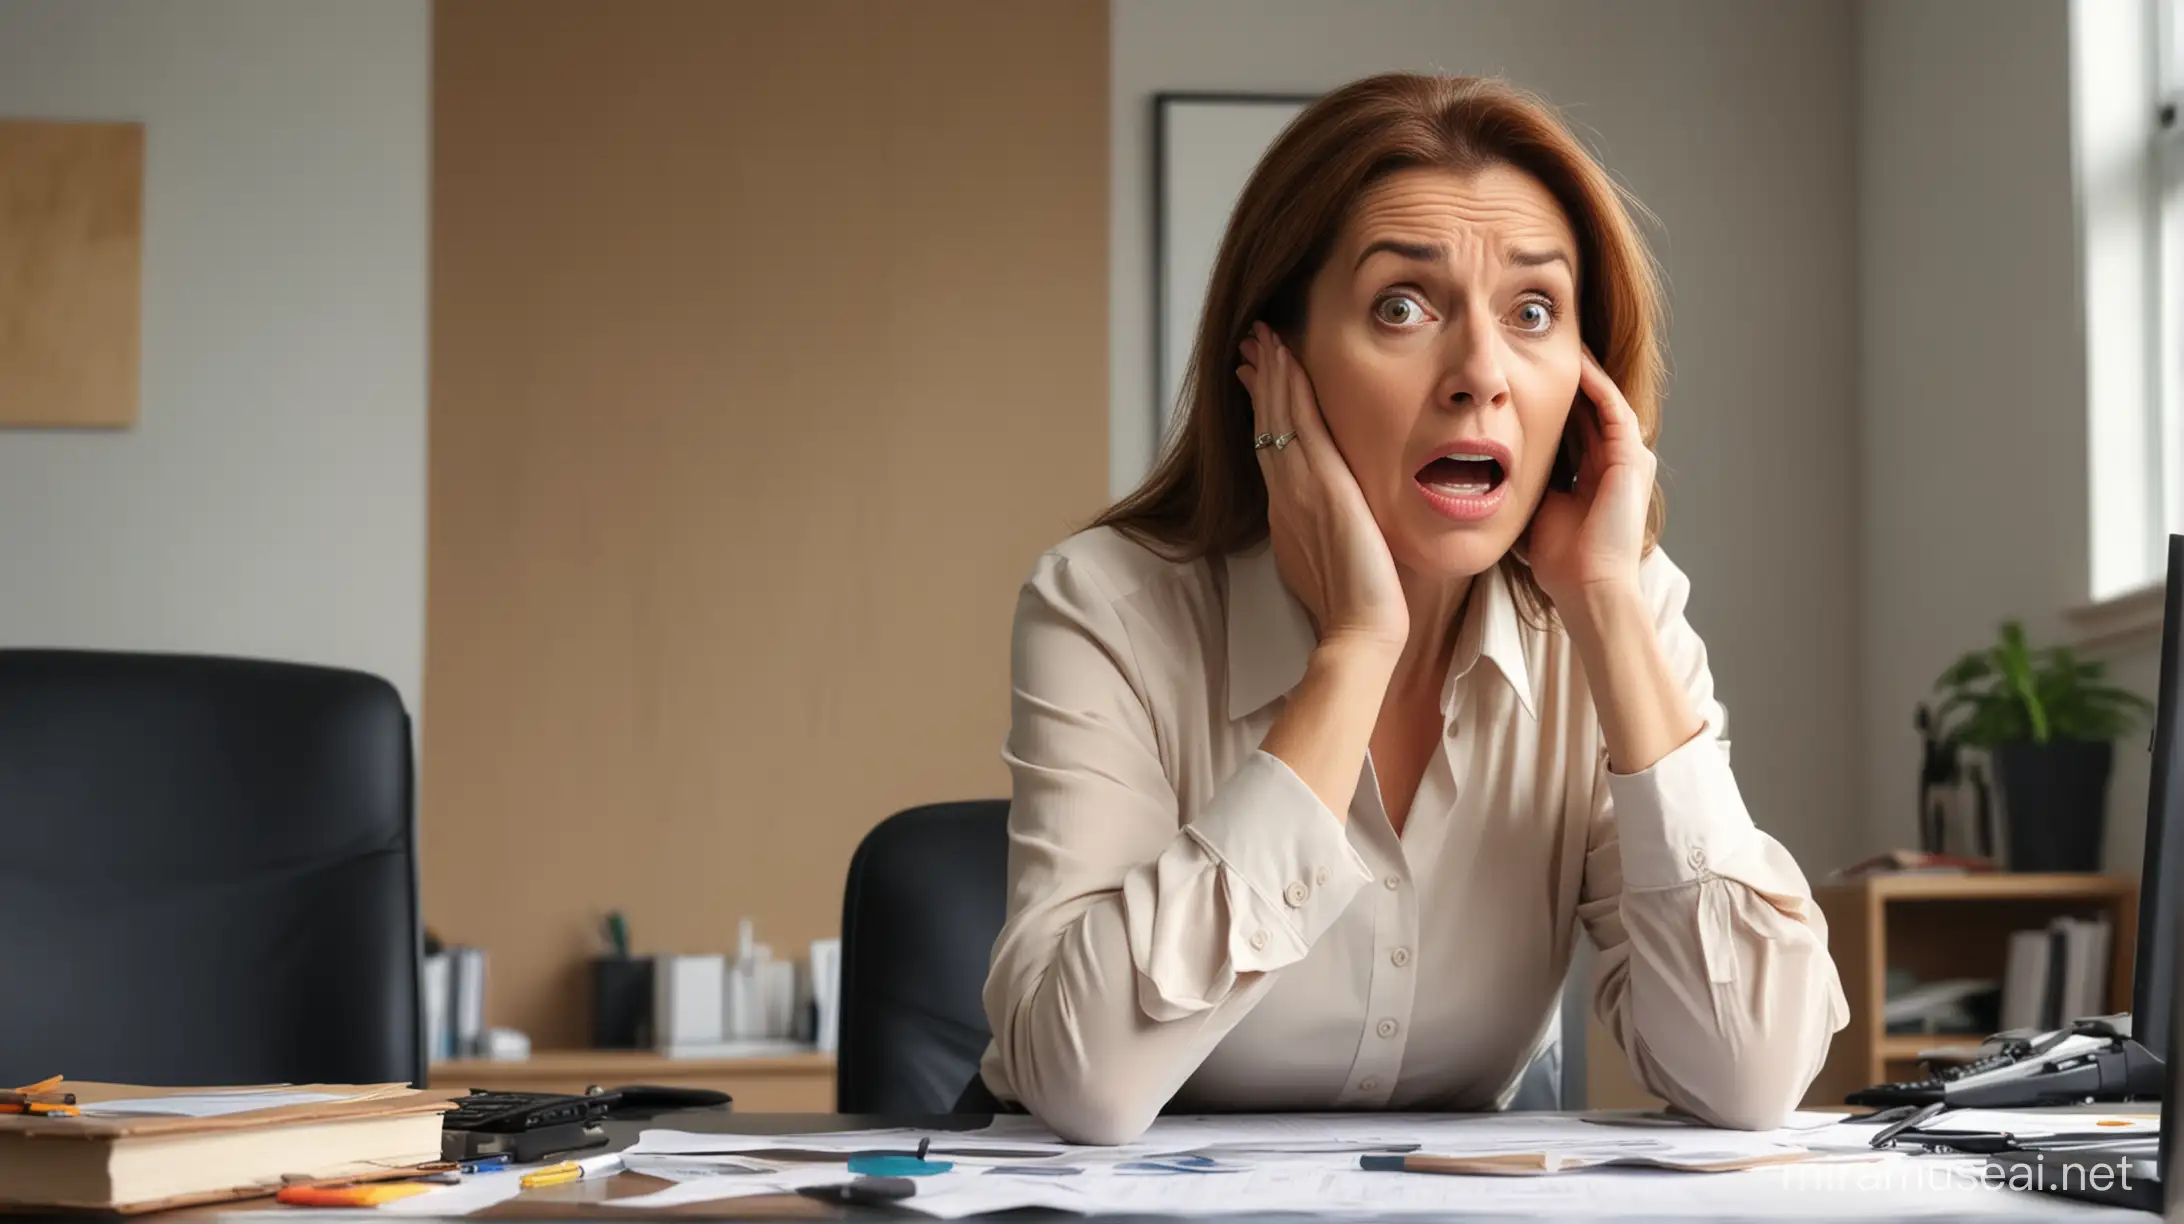 40 year woman executive worried, shocked in office setup, looking straight, oil painting style